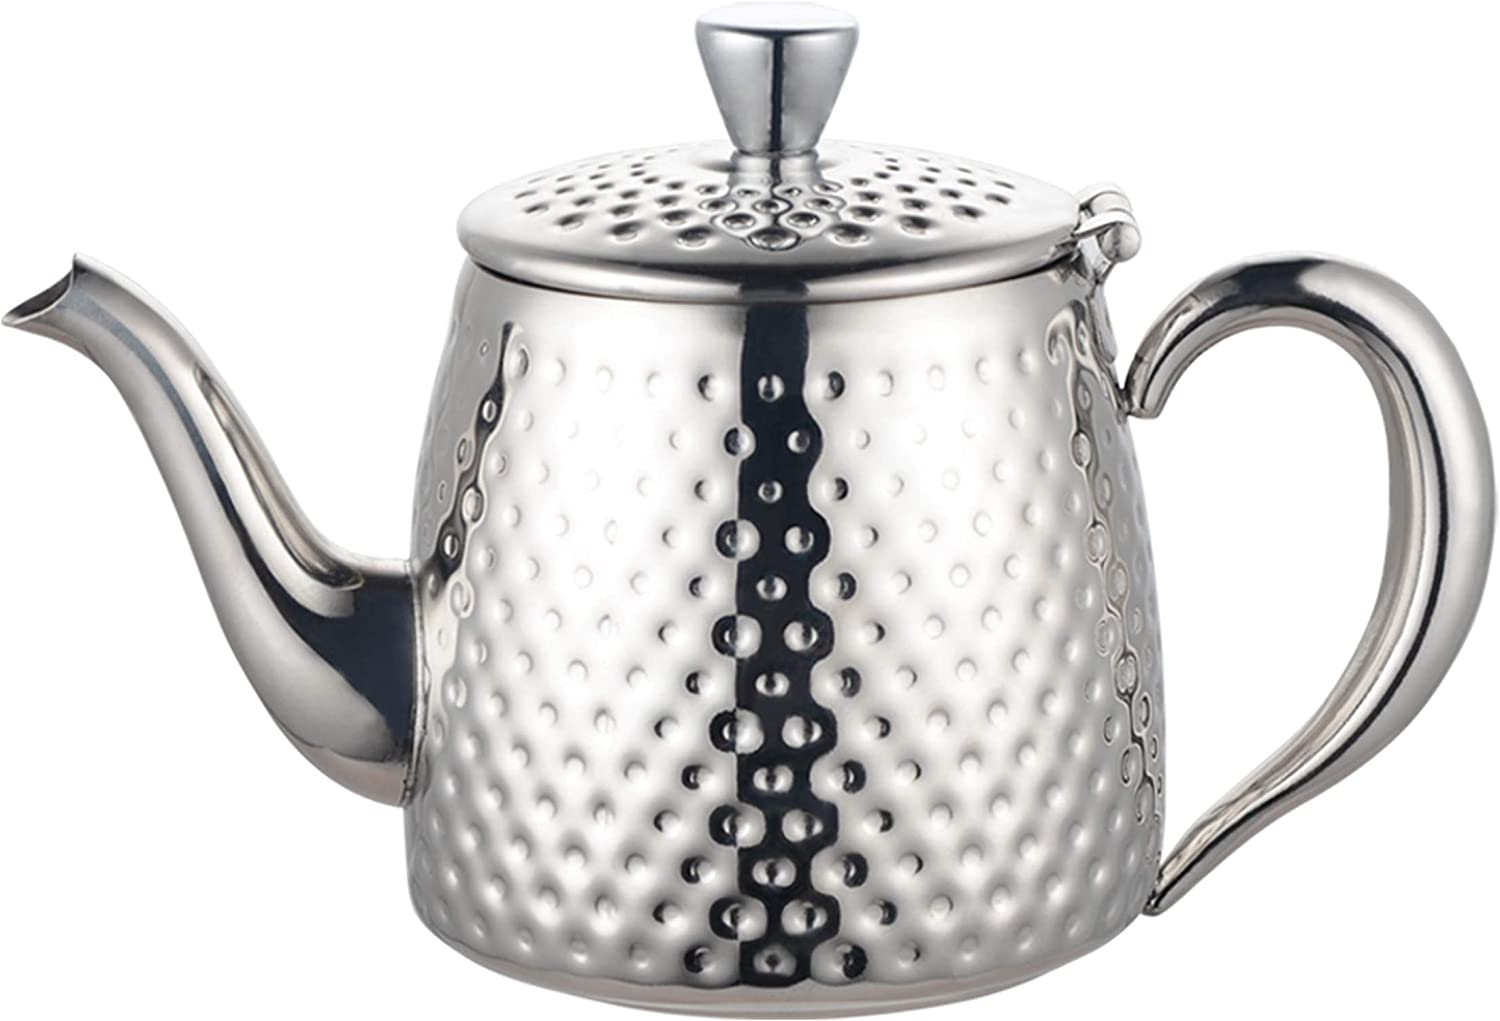 Cafe Ole Café Olé Sandringham Hammered Effect Teapot in High Quality 18/10 Stainless Steel - High Polish 35oz 1L Non Drip Cast Hollow Handles